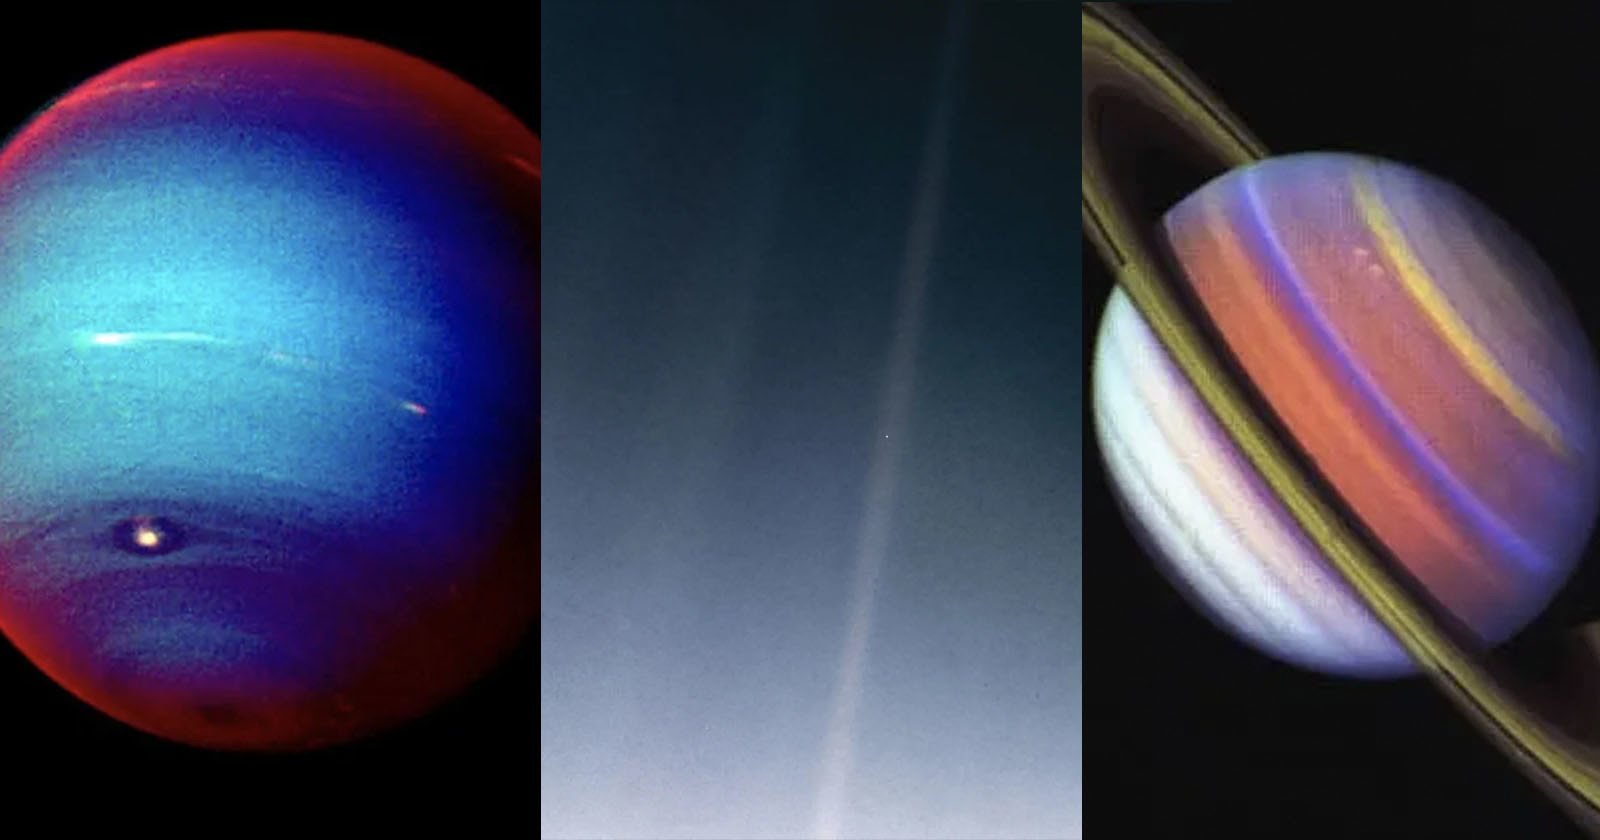 NASA to Power Down Voyager Probes: Here Are Their Best Space Photos